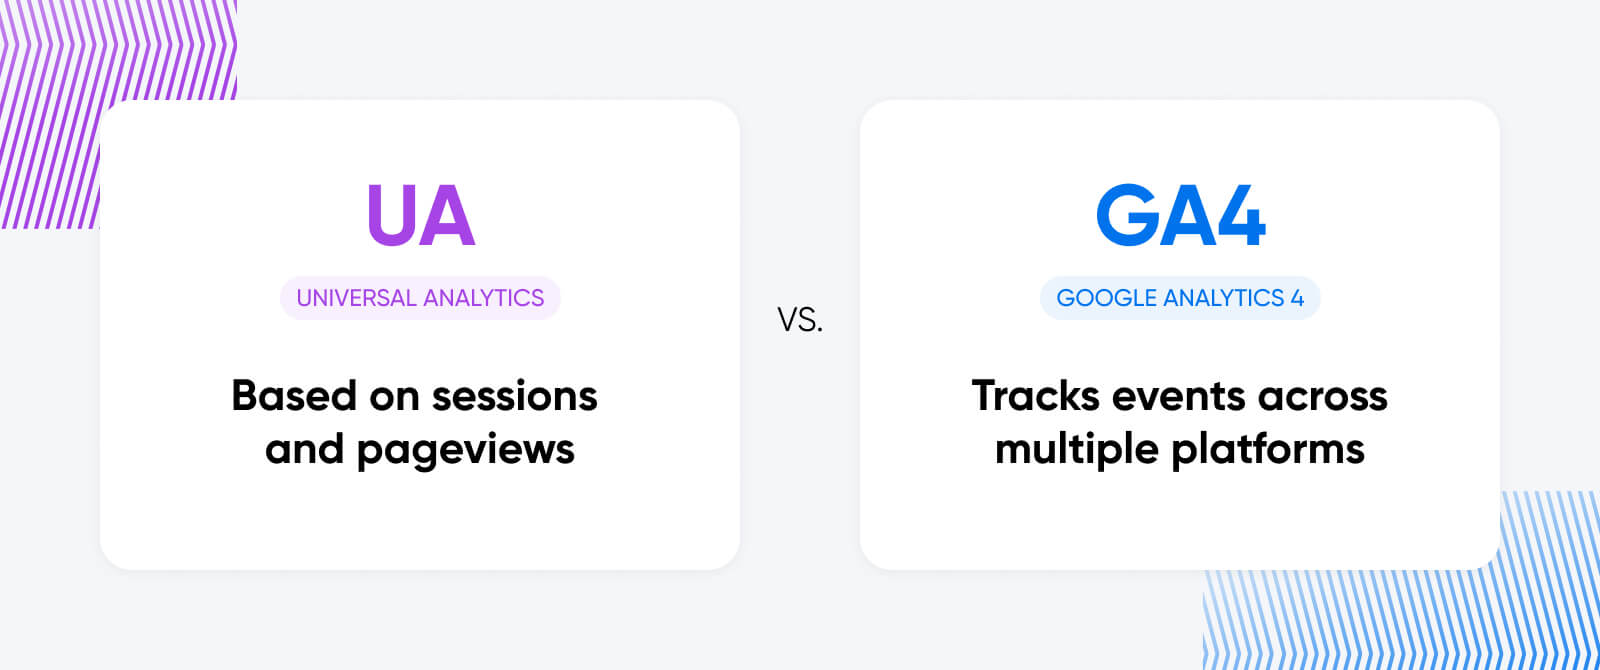 Difference between Universal Analytics and Google Analytics 4. Universal Analytics is based on sessions and pageviews. Google Analytics 4 tracks events across multiple platforms